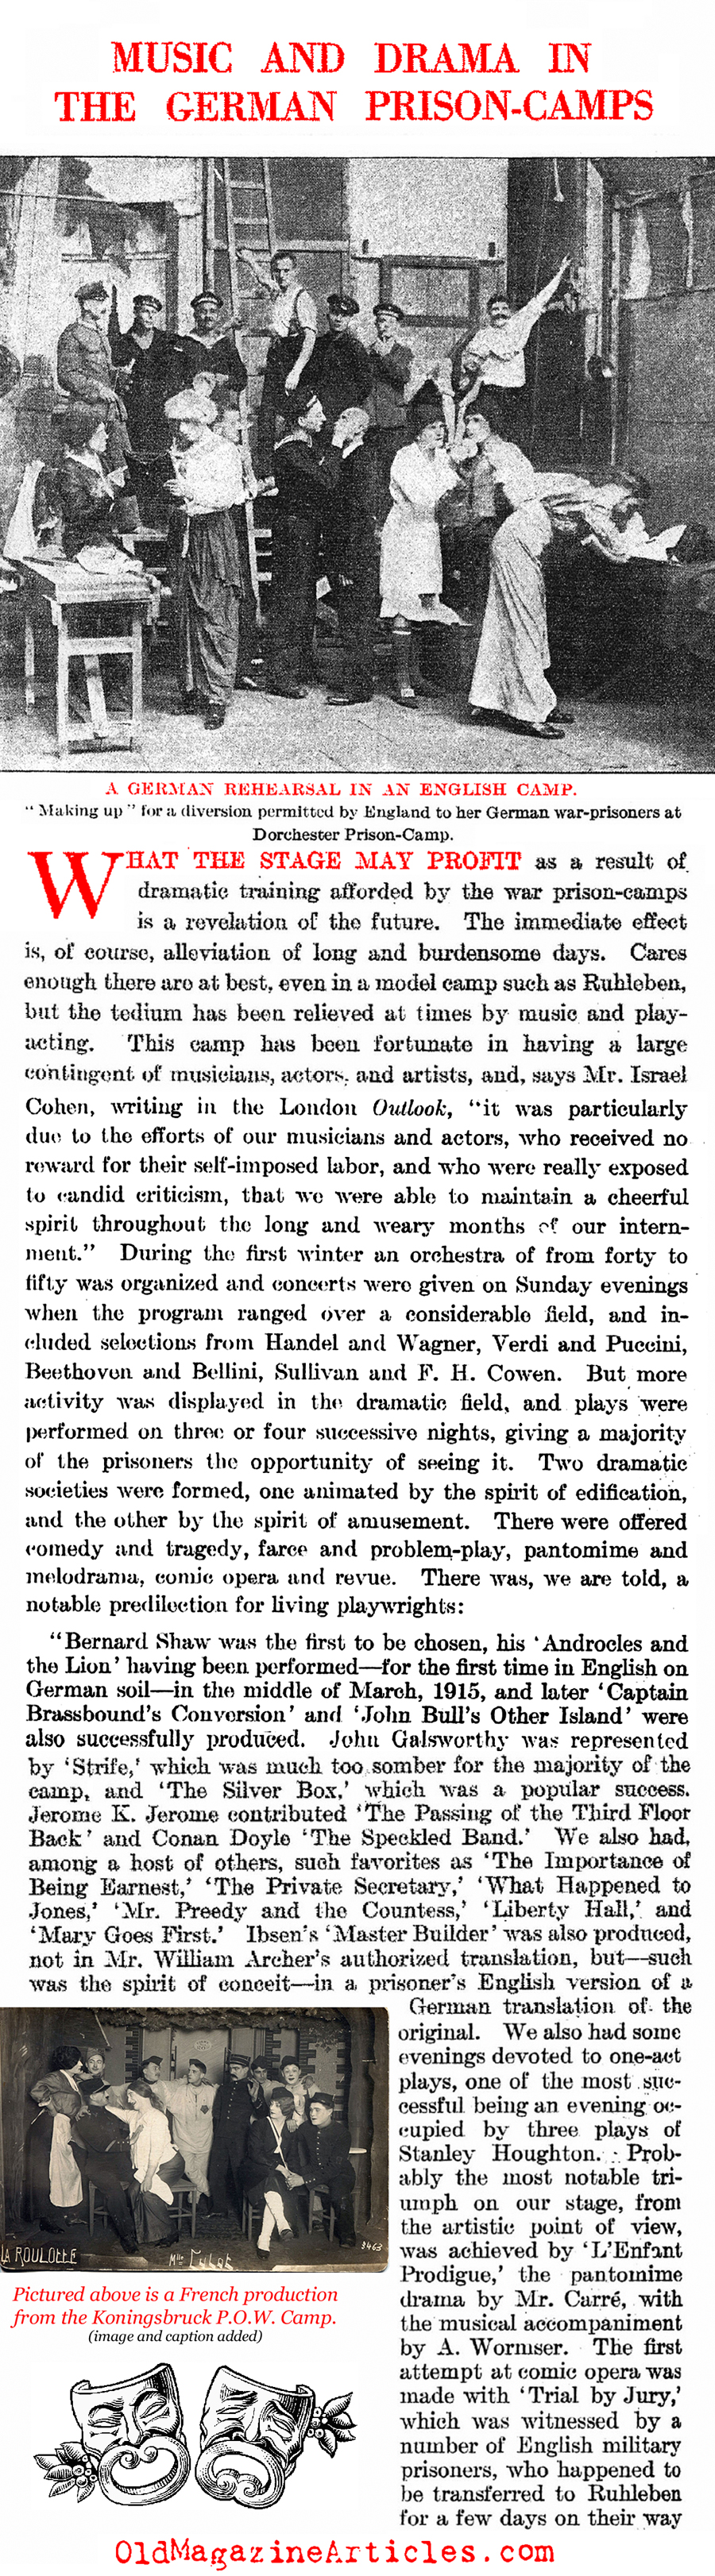 High Culture in World War One Prison Camps (Literary Digest, 1917)